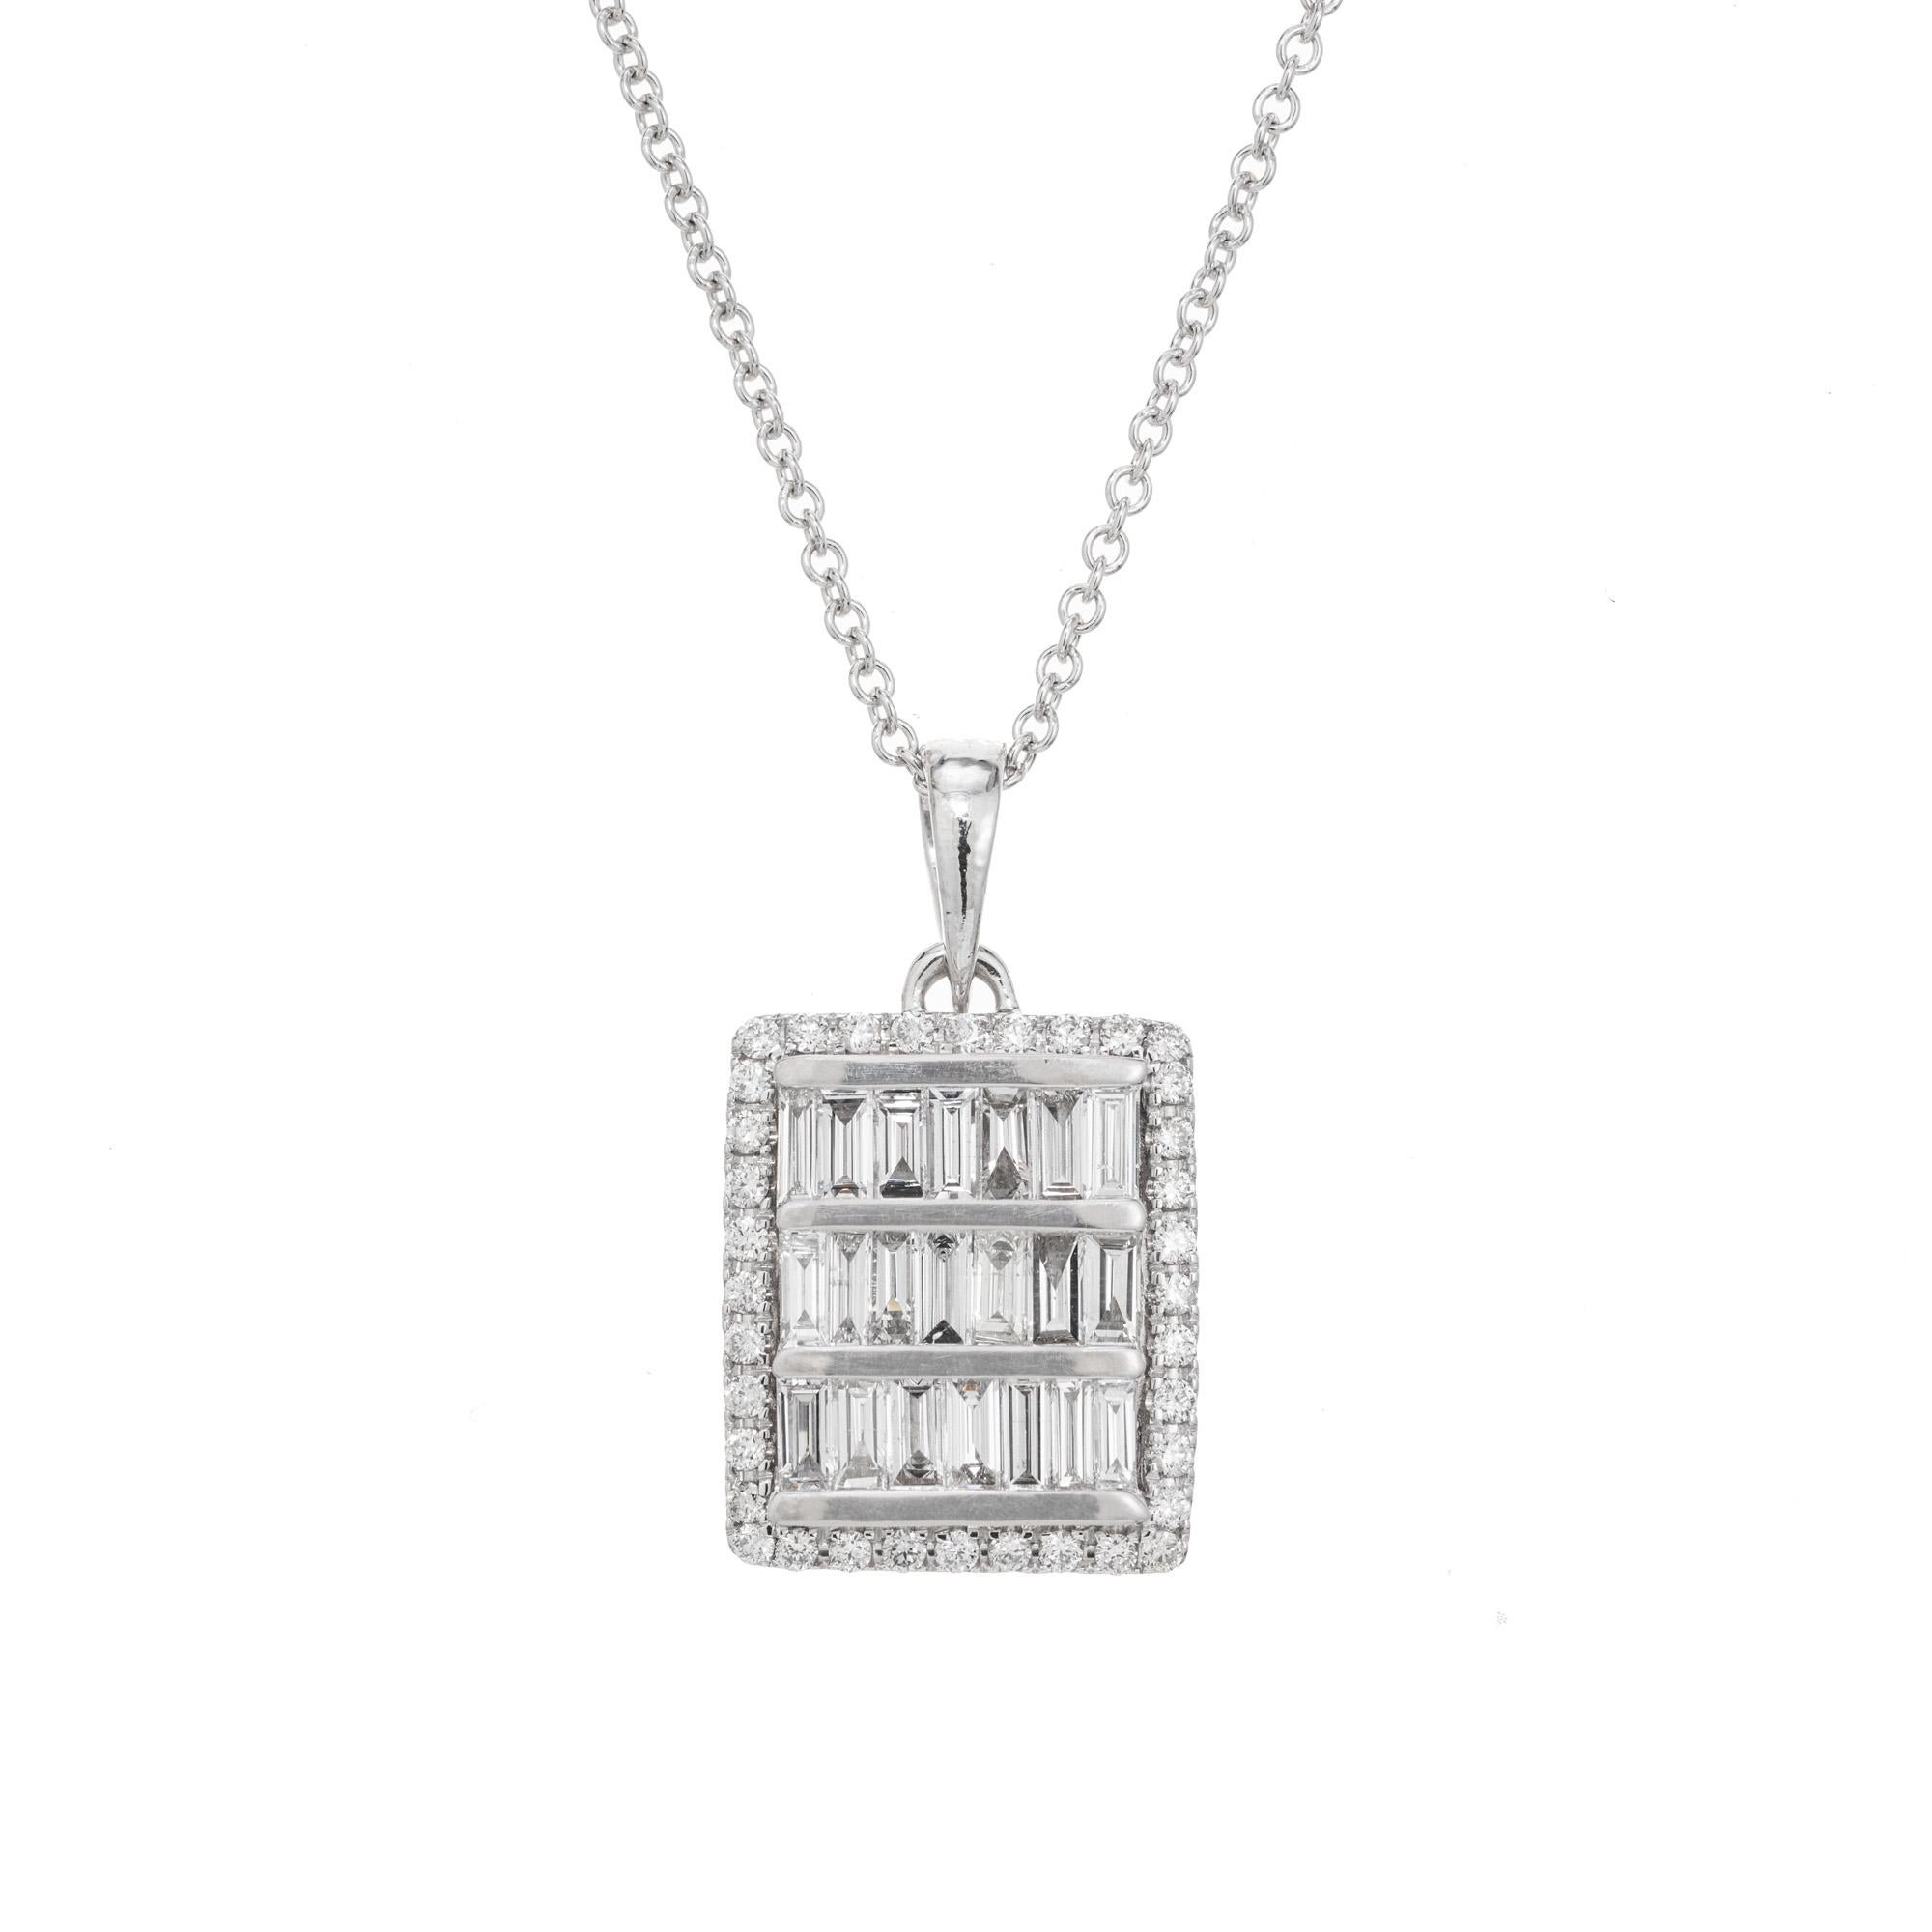 Diamond pendant necklace. This rectangle shaped setting has three rows for 21 straight baguette diamonds with a halo of 21 round brilliant cut diamonds which hangs from a 18 inch 14k white gold chain. 

21 straight cut baguette diamonds, G-H SI